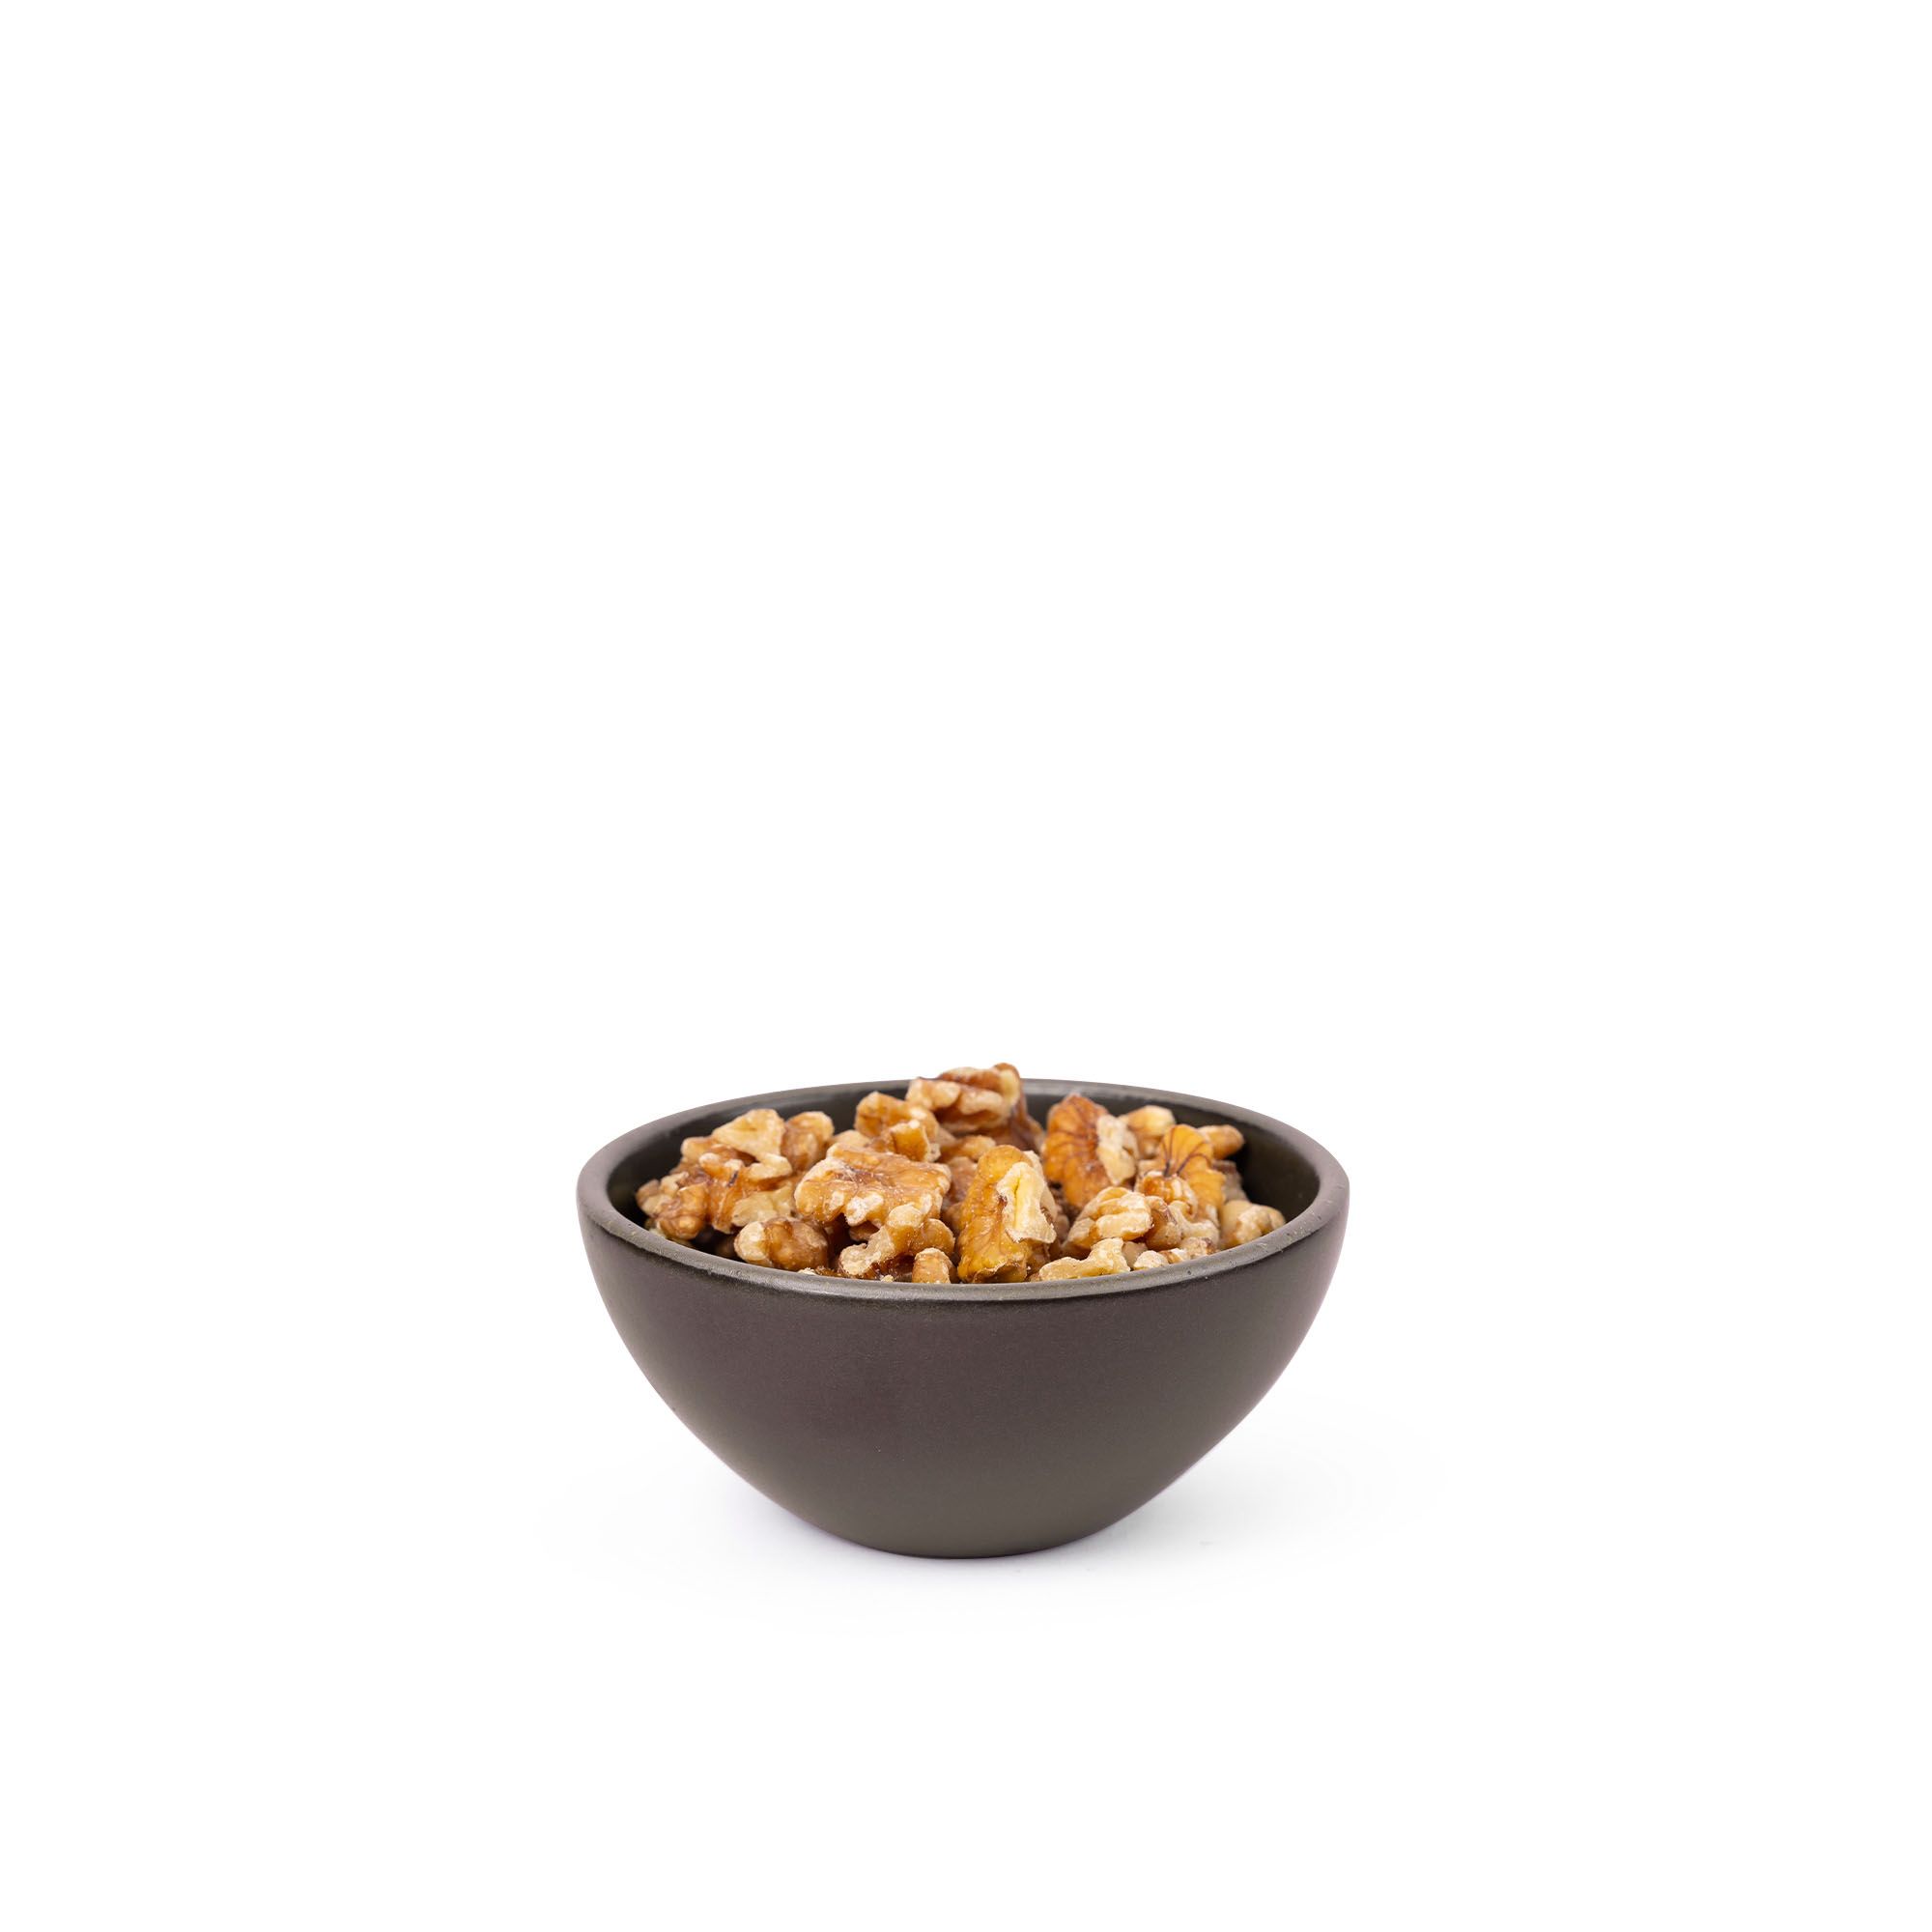 Walnuts in a small dessert sized rounded ceramic bowl in a dark cool brown color featuring iron speckles and an unglazed rim